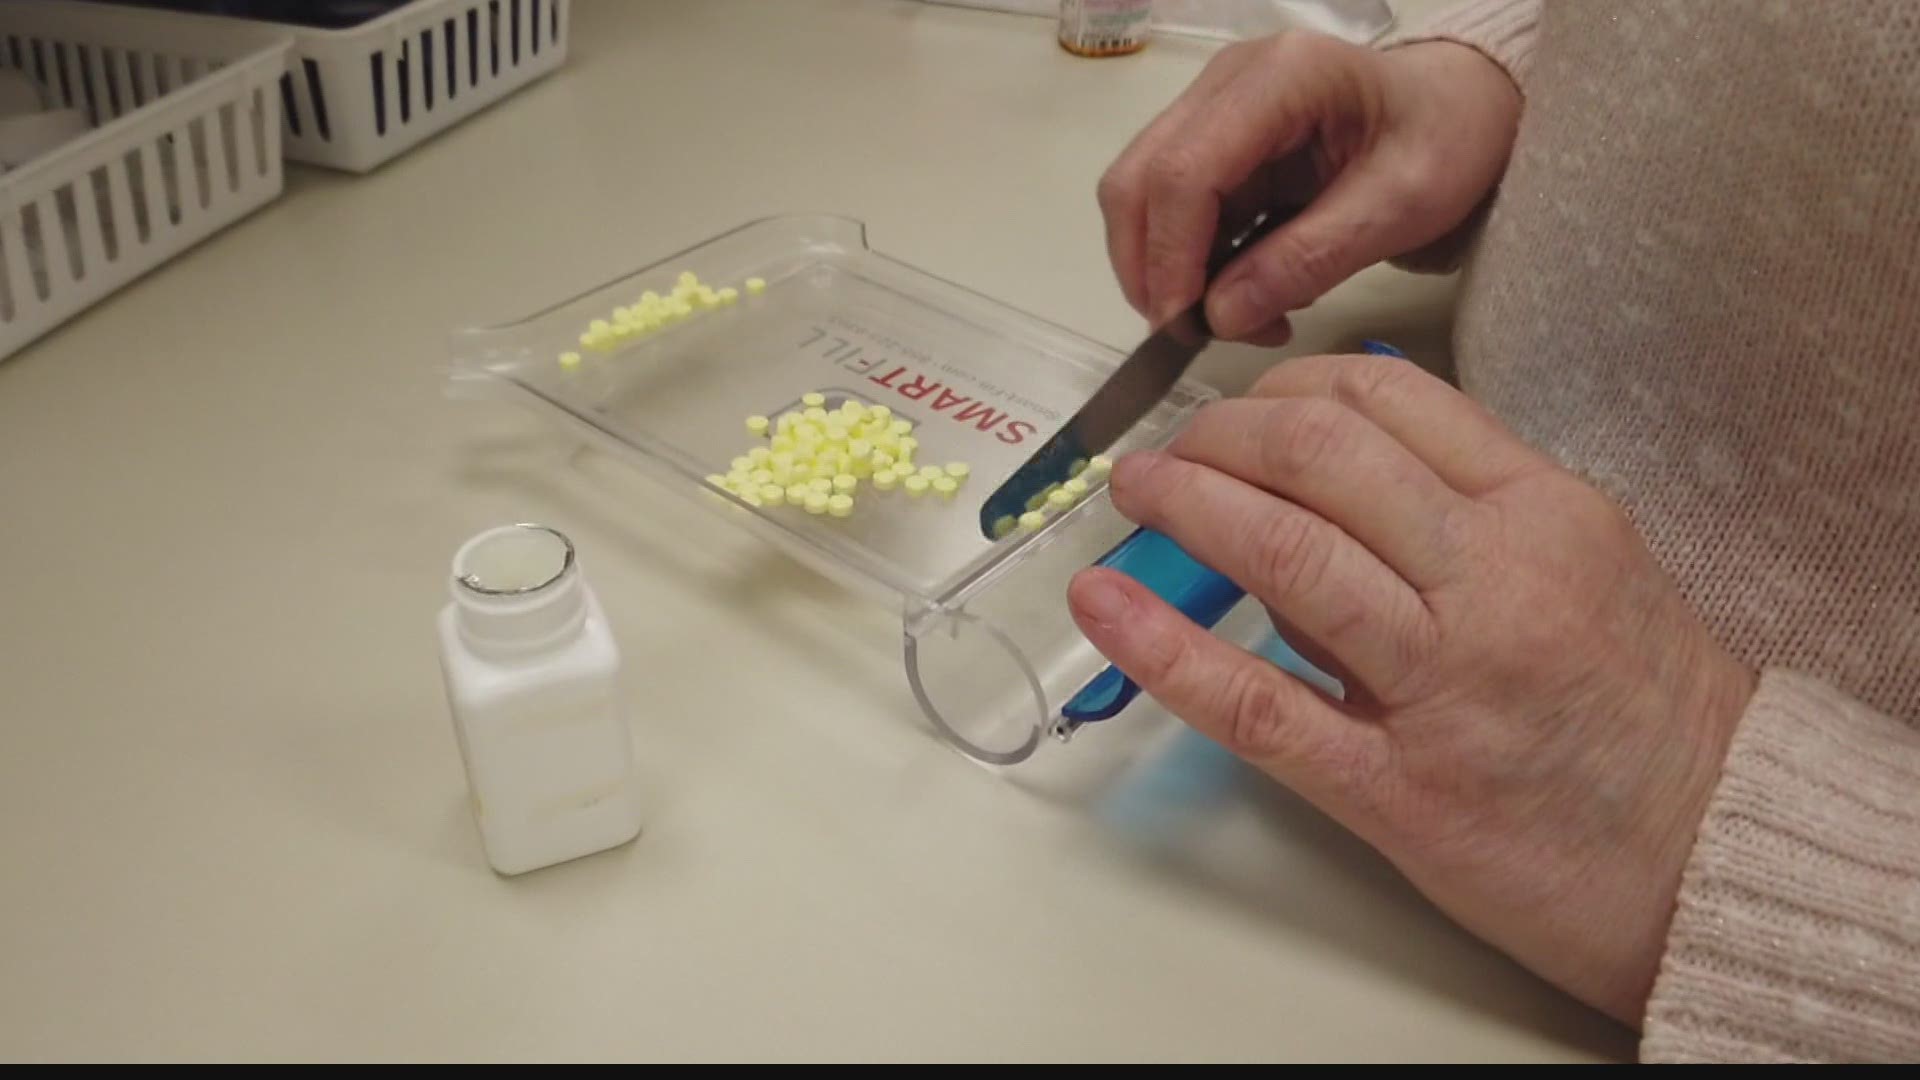 13 Investigates is looking in to why drug prices went up at the beginning of the year and what you can do to save money.